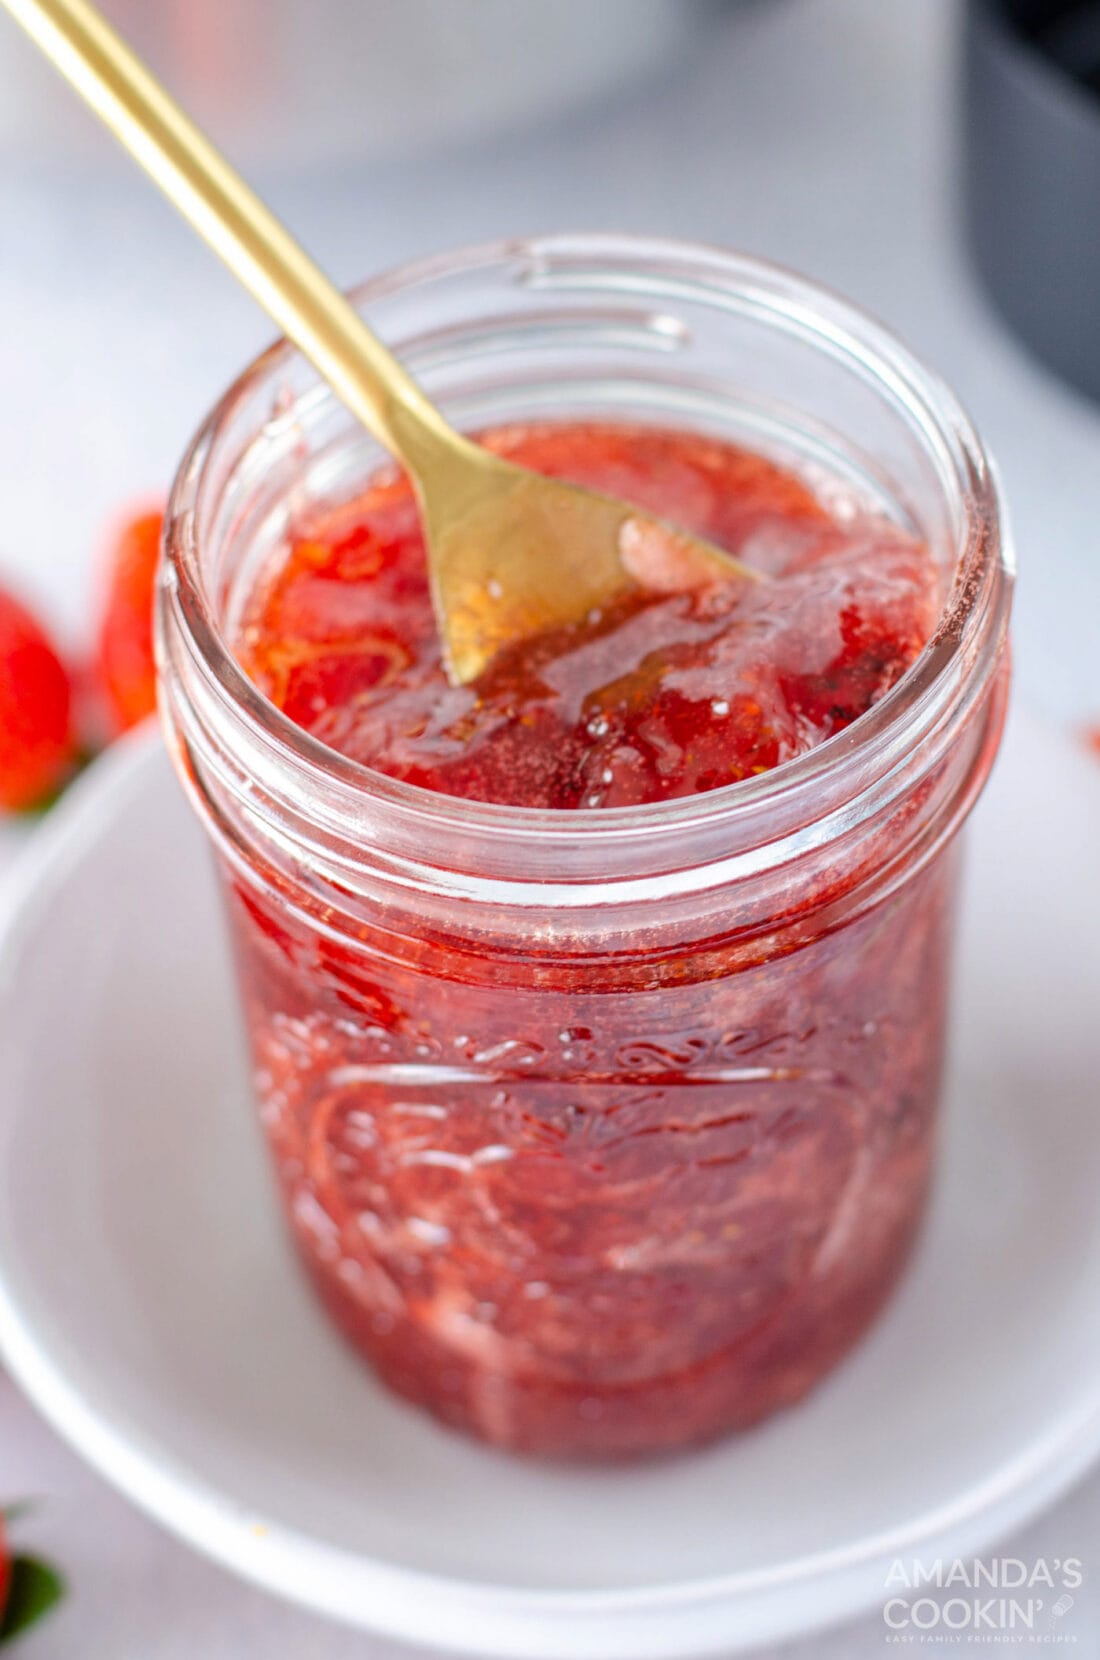 Jar of Strawberry Jam with a spoon in it